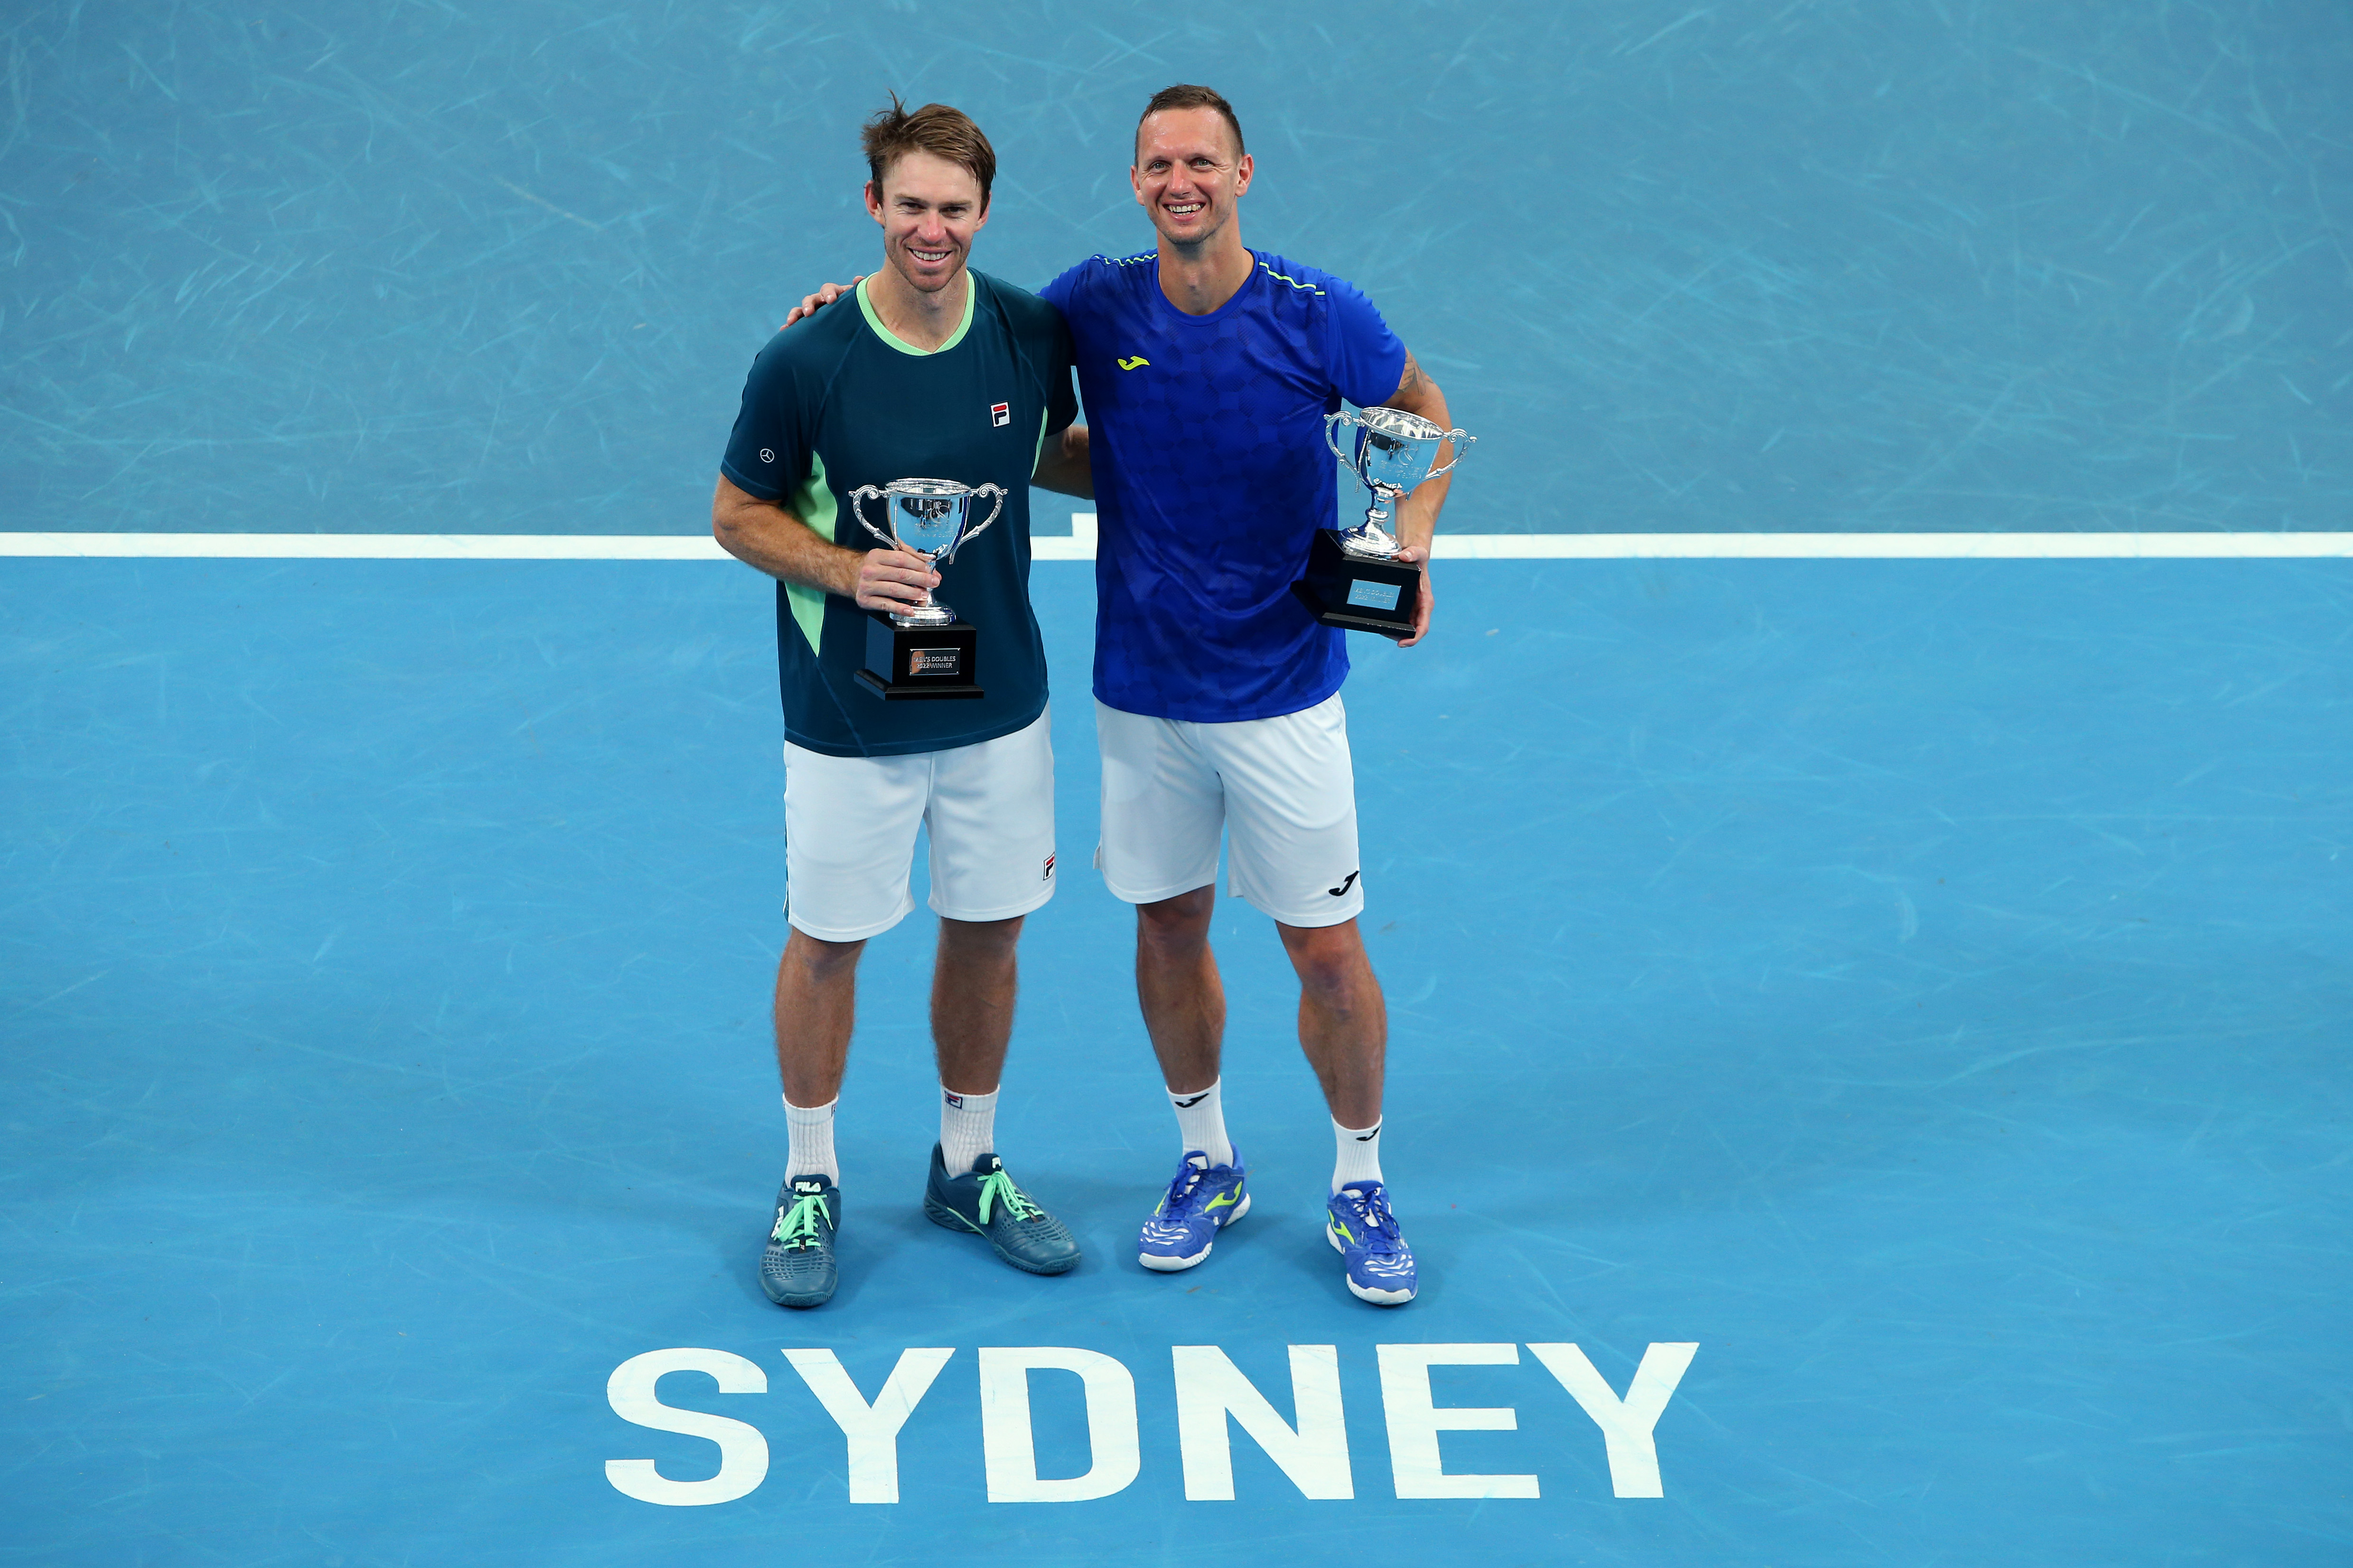 Peers and Polasek capture Sydney Tennis Classic doubles title 15 January, 2022 All News News and Features News and Events Tennis Australia